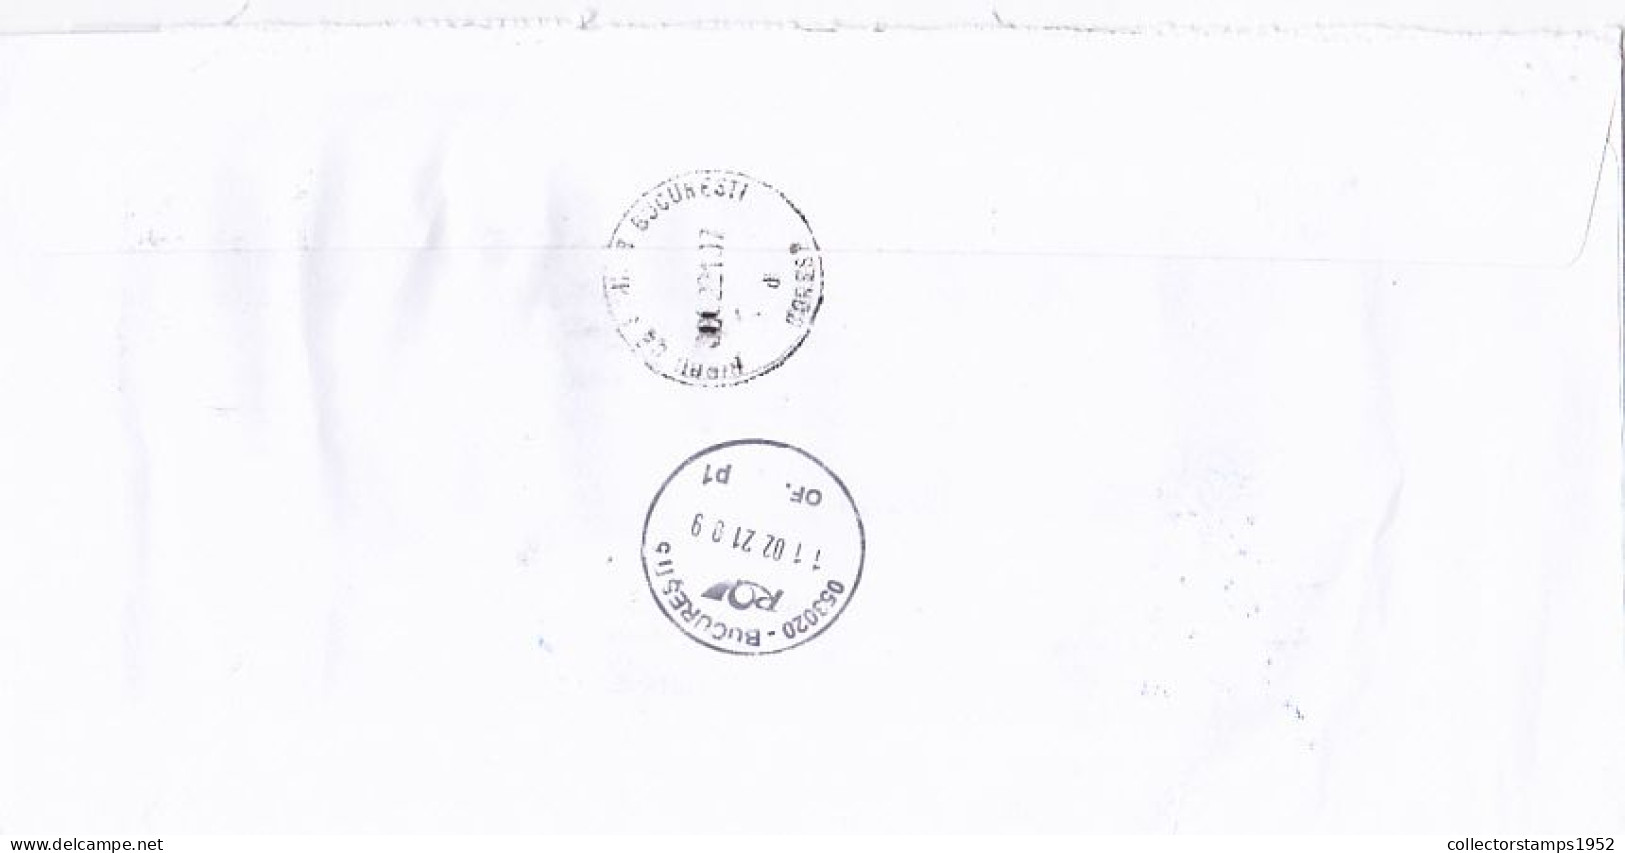 COAT OF ARMS, KREMLINS, FINE STAMPS ON REGISTERED COVER, 2021, RUSSIA - Cartas & Documentos